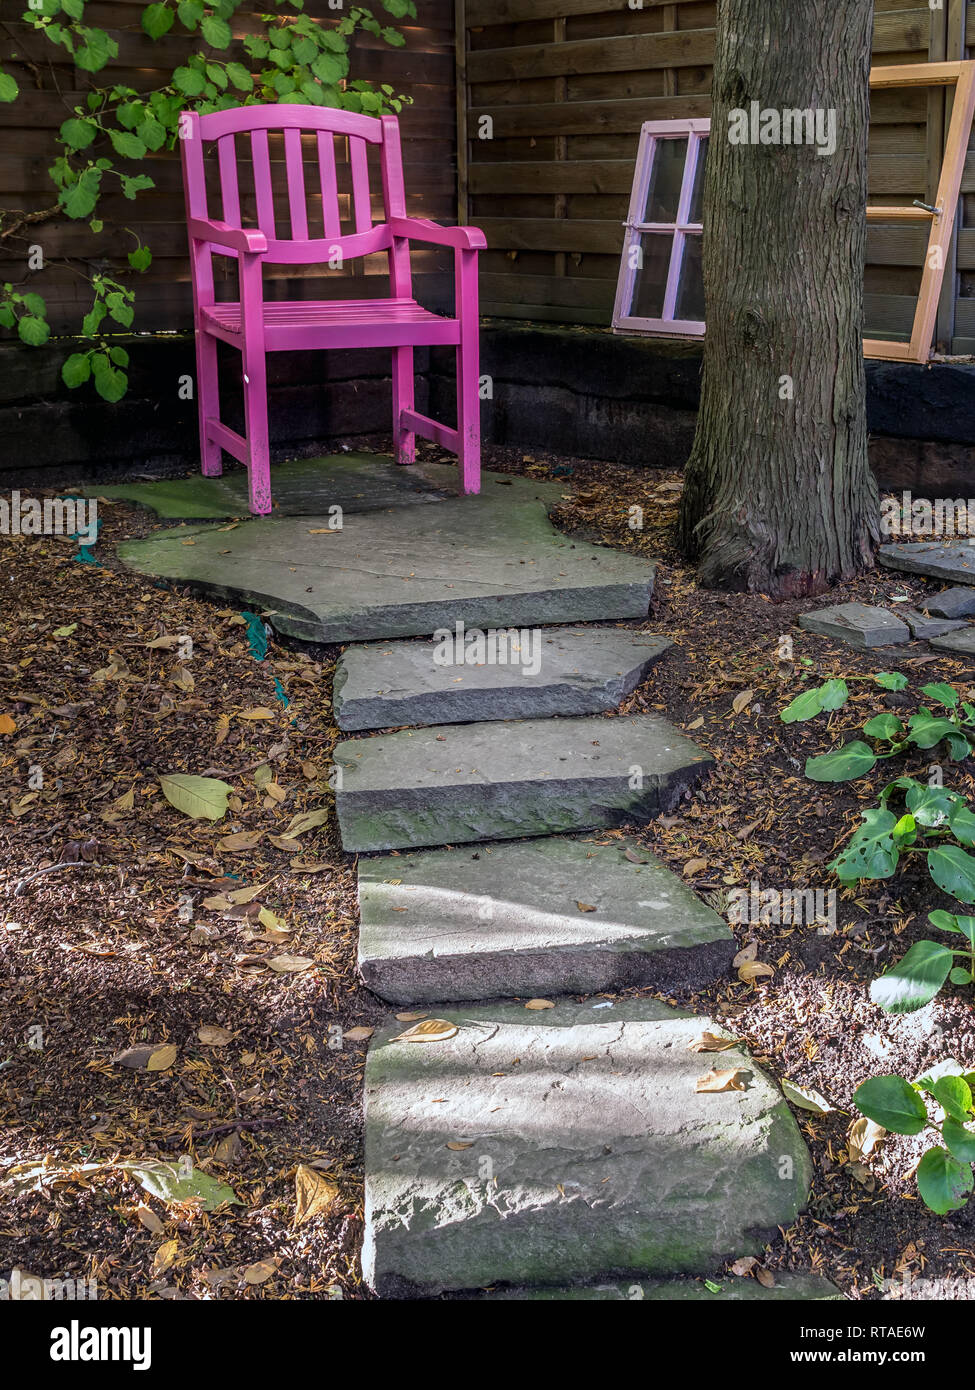 Snug place in the old garden with pink wooden chair Stock Photo